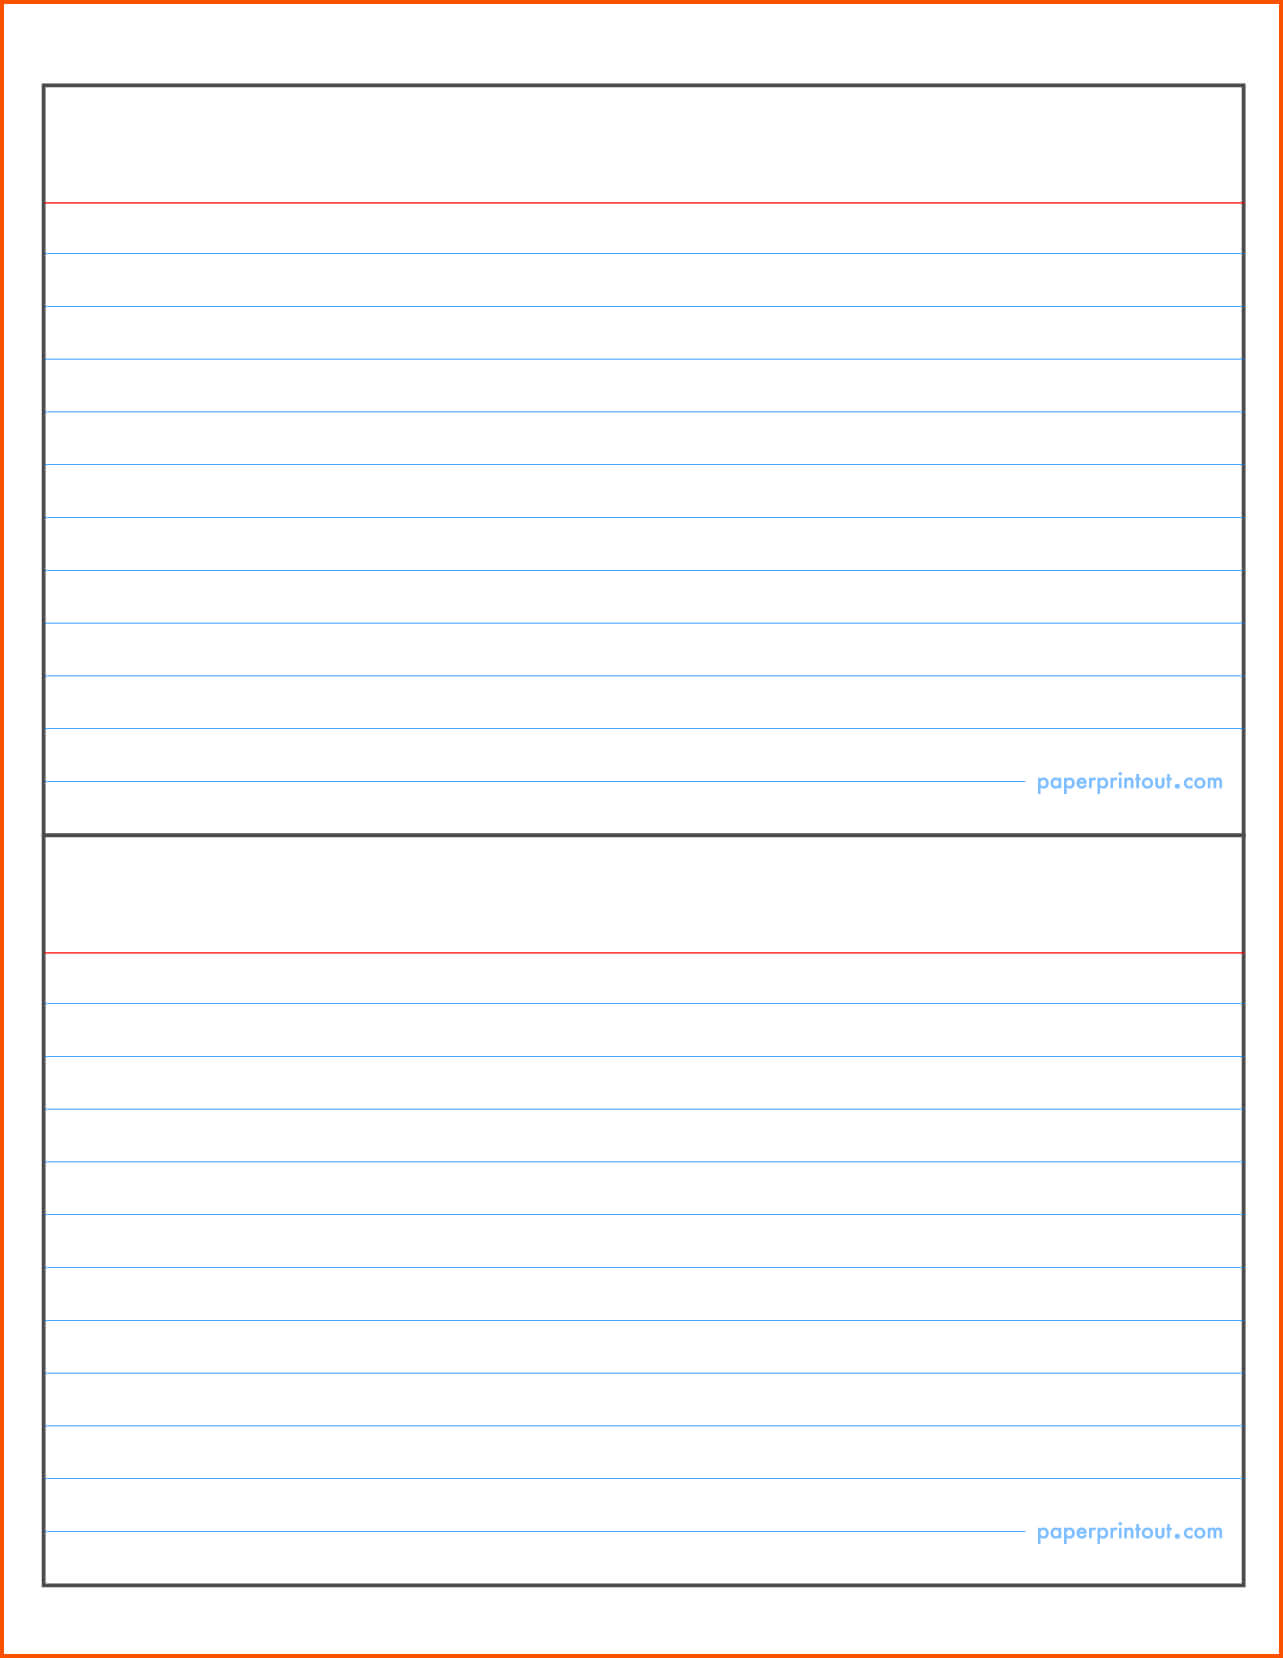 20 Images Of Ms Word 3 X 5 Index Card Template | Zeept With Regard To 3X5 Blank Index Card Template